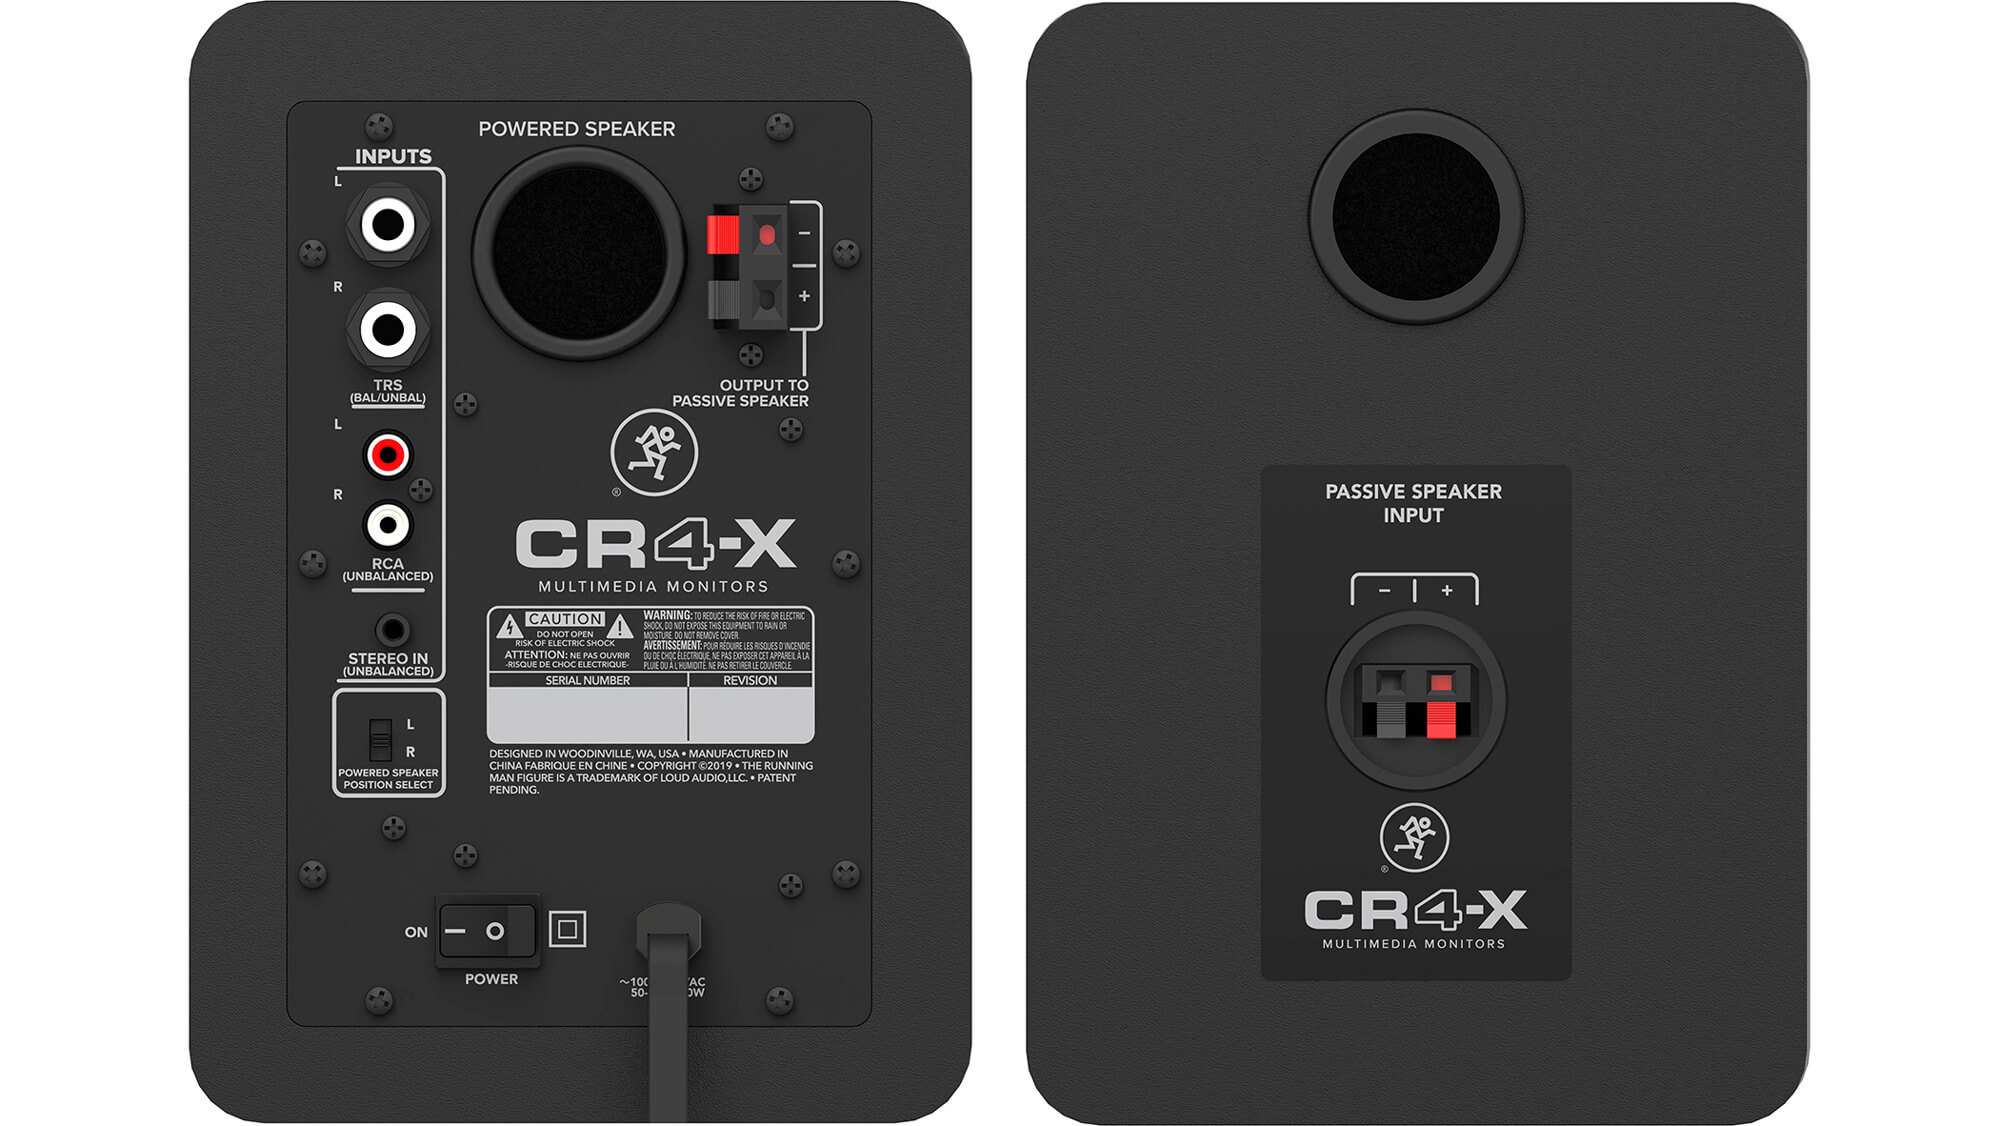 The CR4-X monitors have both TRS and RCA inputs, but they have no tuning options. The rear bass port allows for low-end projection, but you'll need to be mindful about placement in front of a wall.